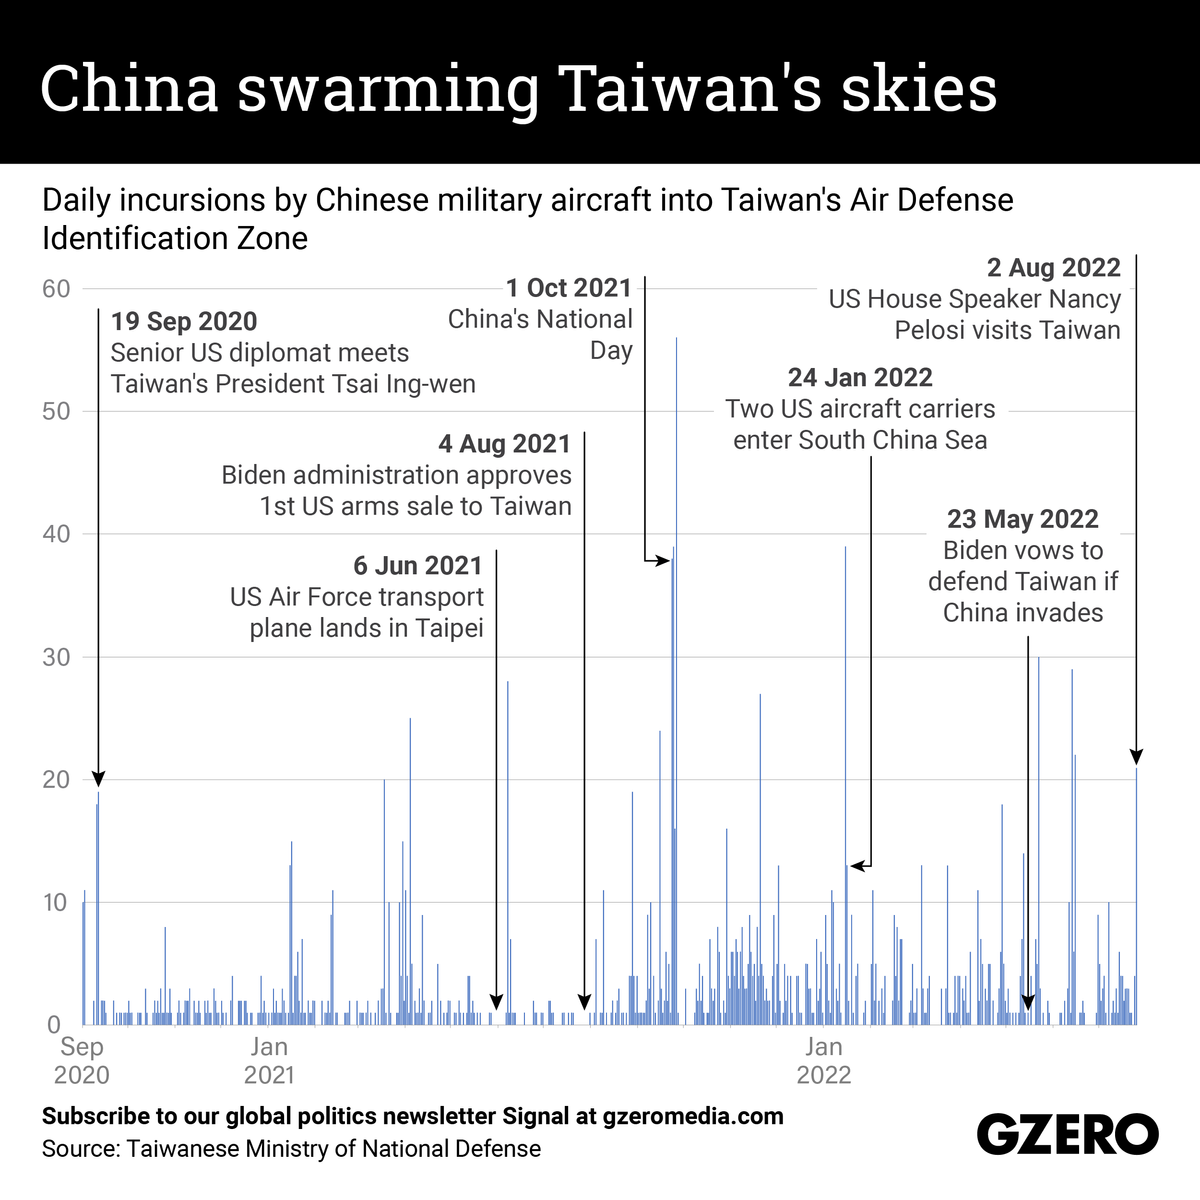 The Graphic Truth: China swarming Taiwan's skies